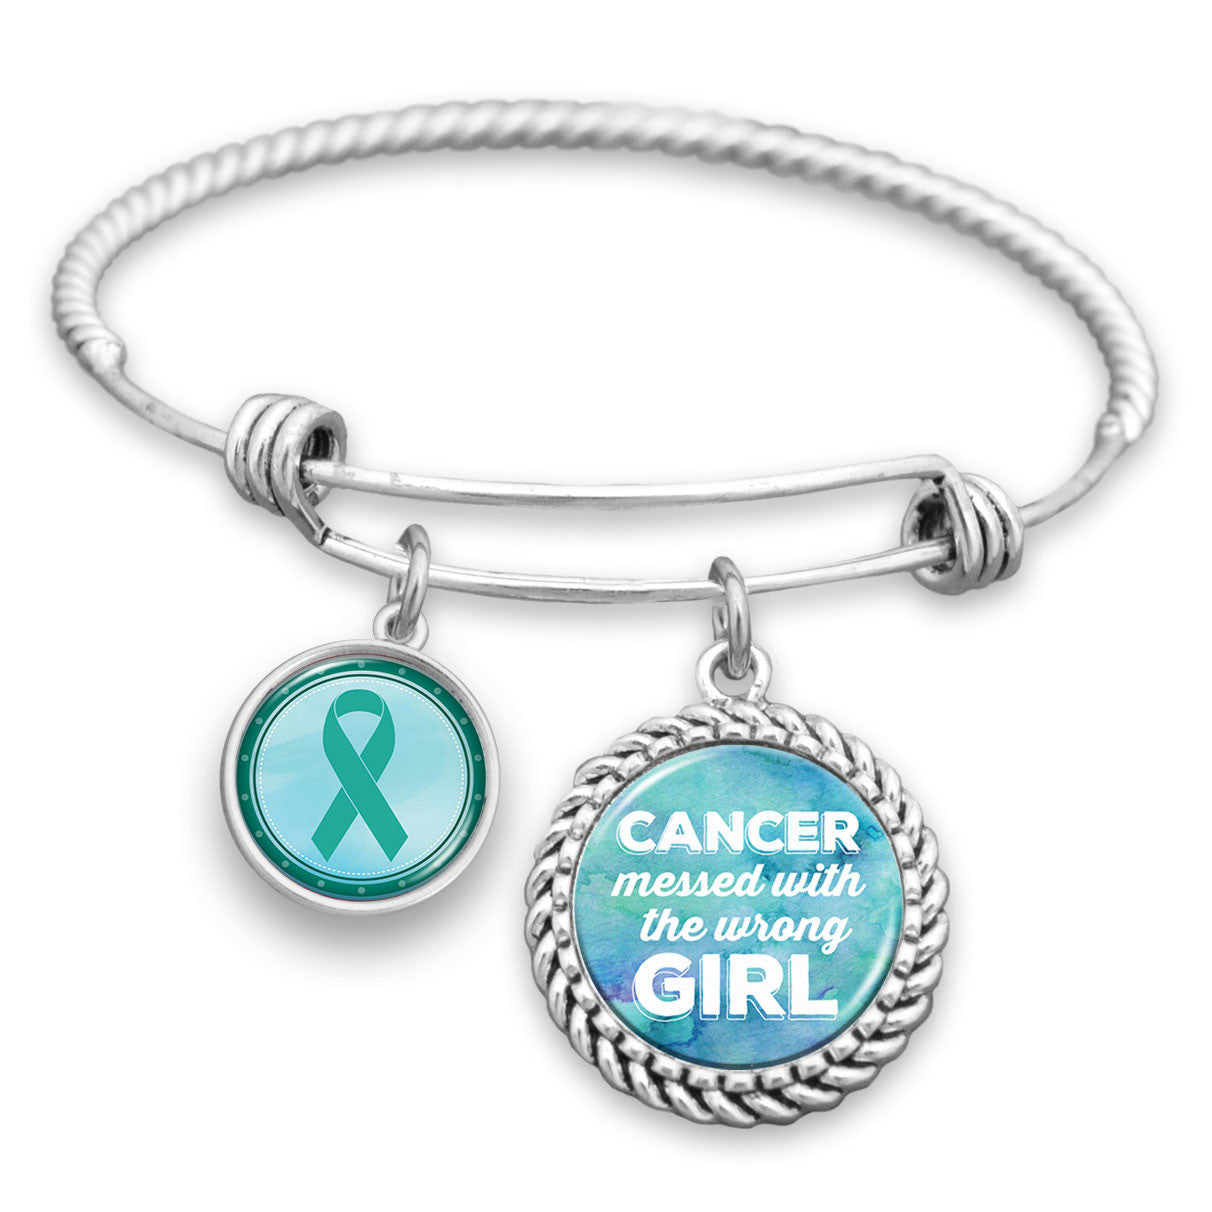 Ovarian Cancer Awareness "Cancer Messed With The Wrong Girl" Charm Bracelet